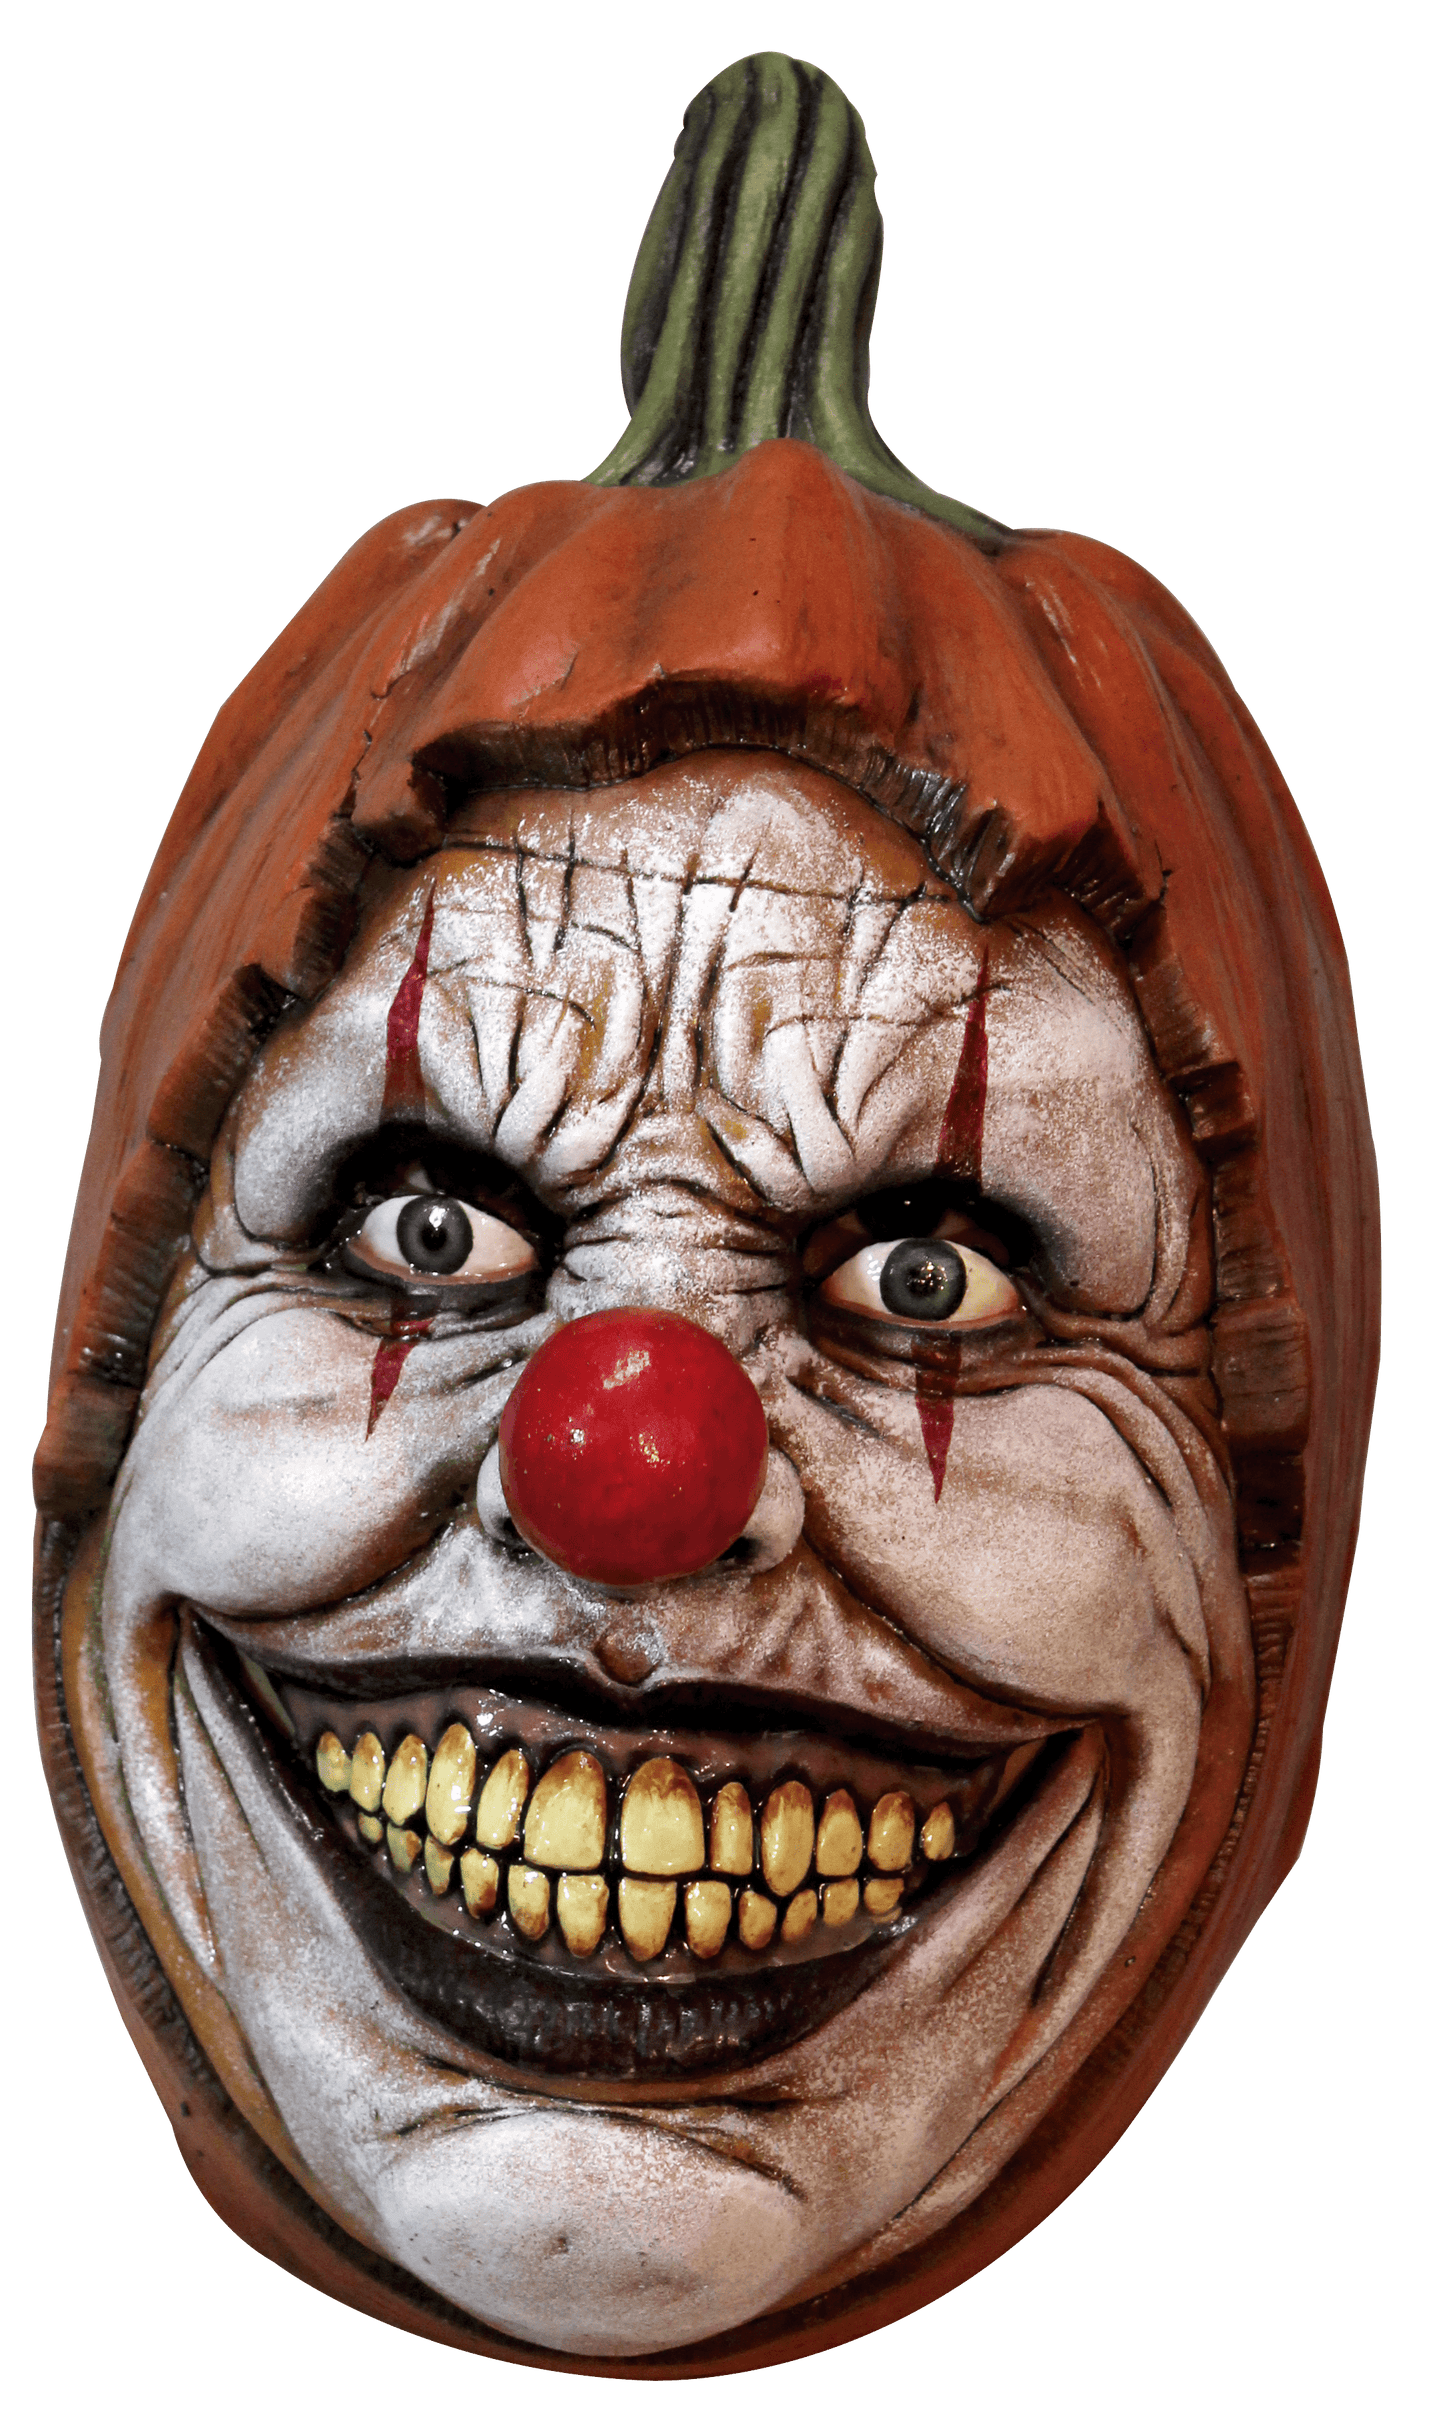 Carving clown